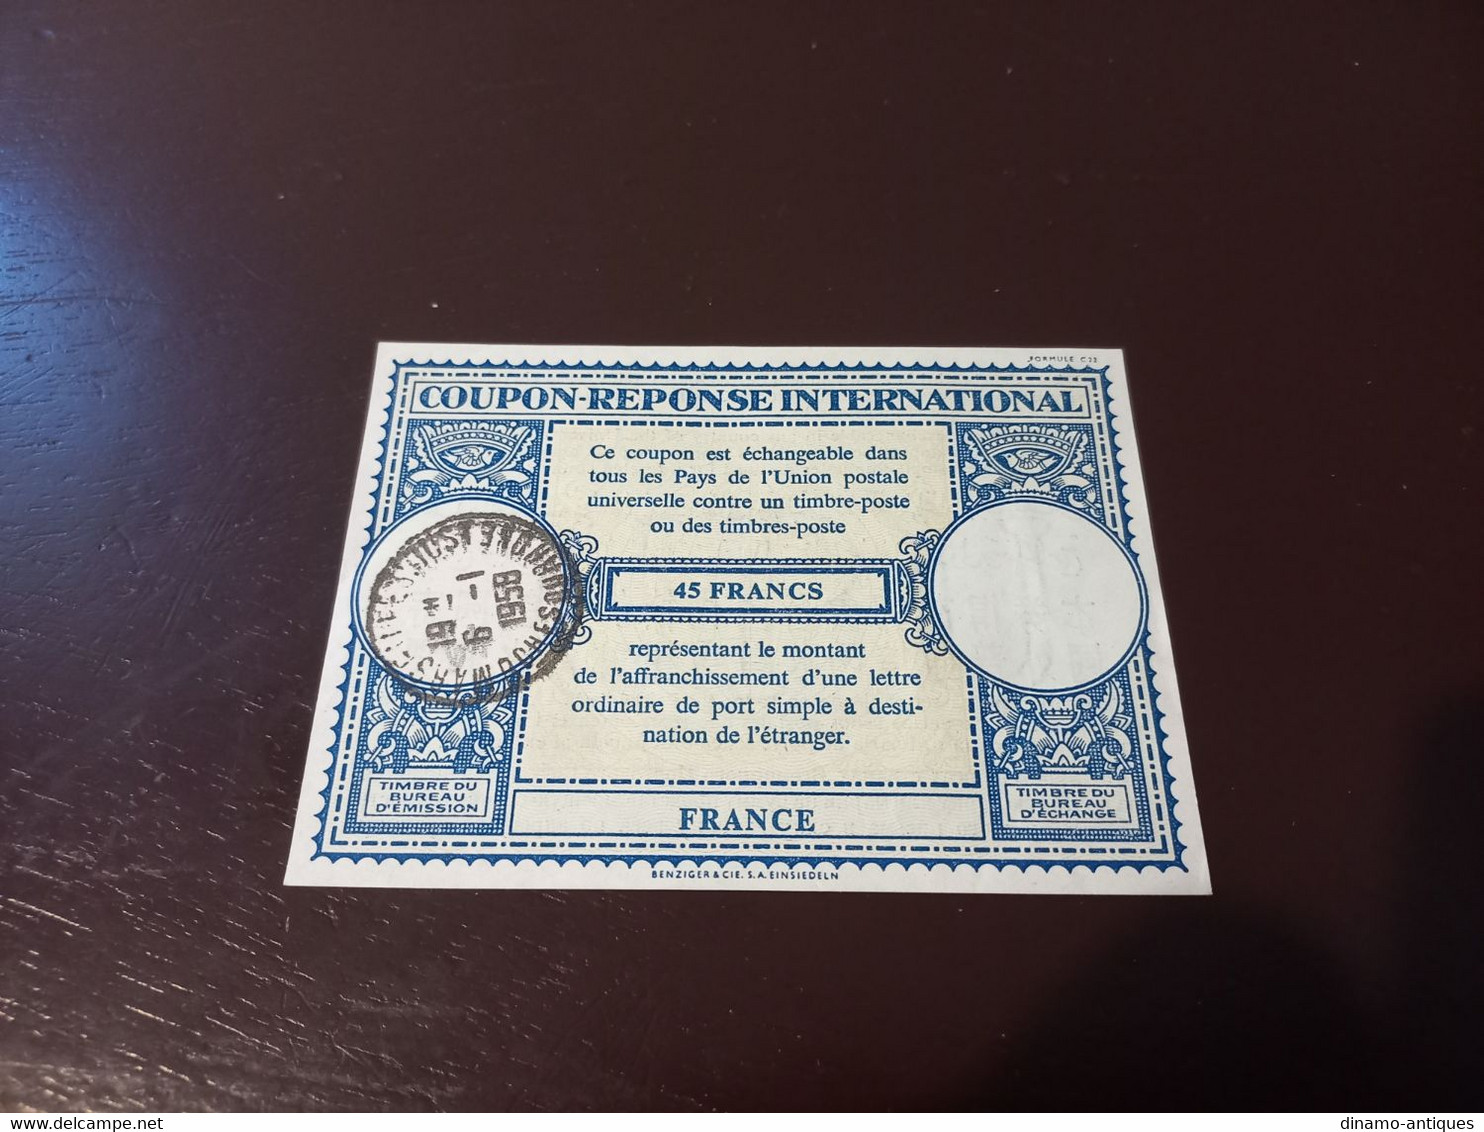 1958 France Coupon Reponse International Marseille 45 Francs Reply Union Postale Universelle - Cupón-respuesta